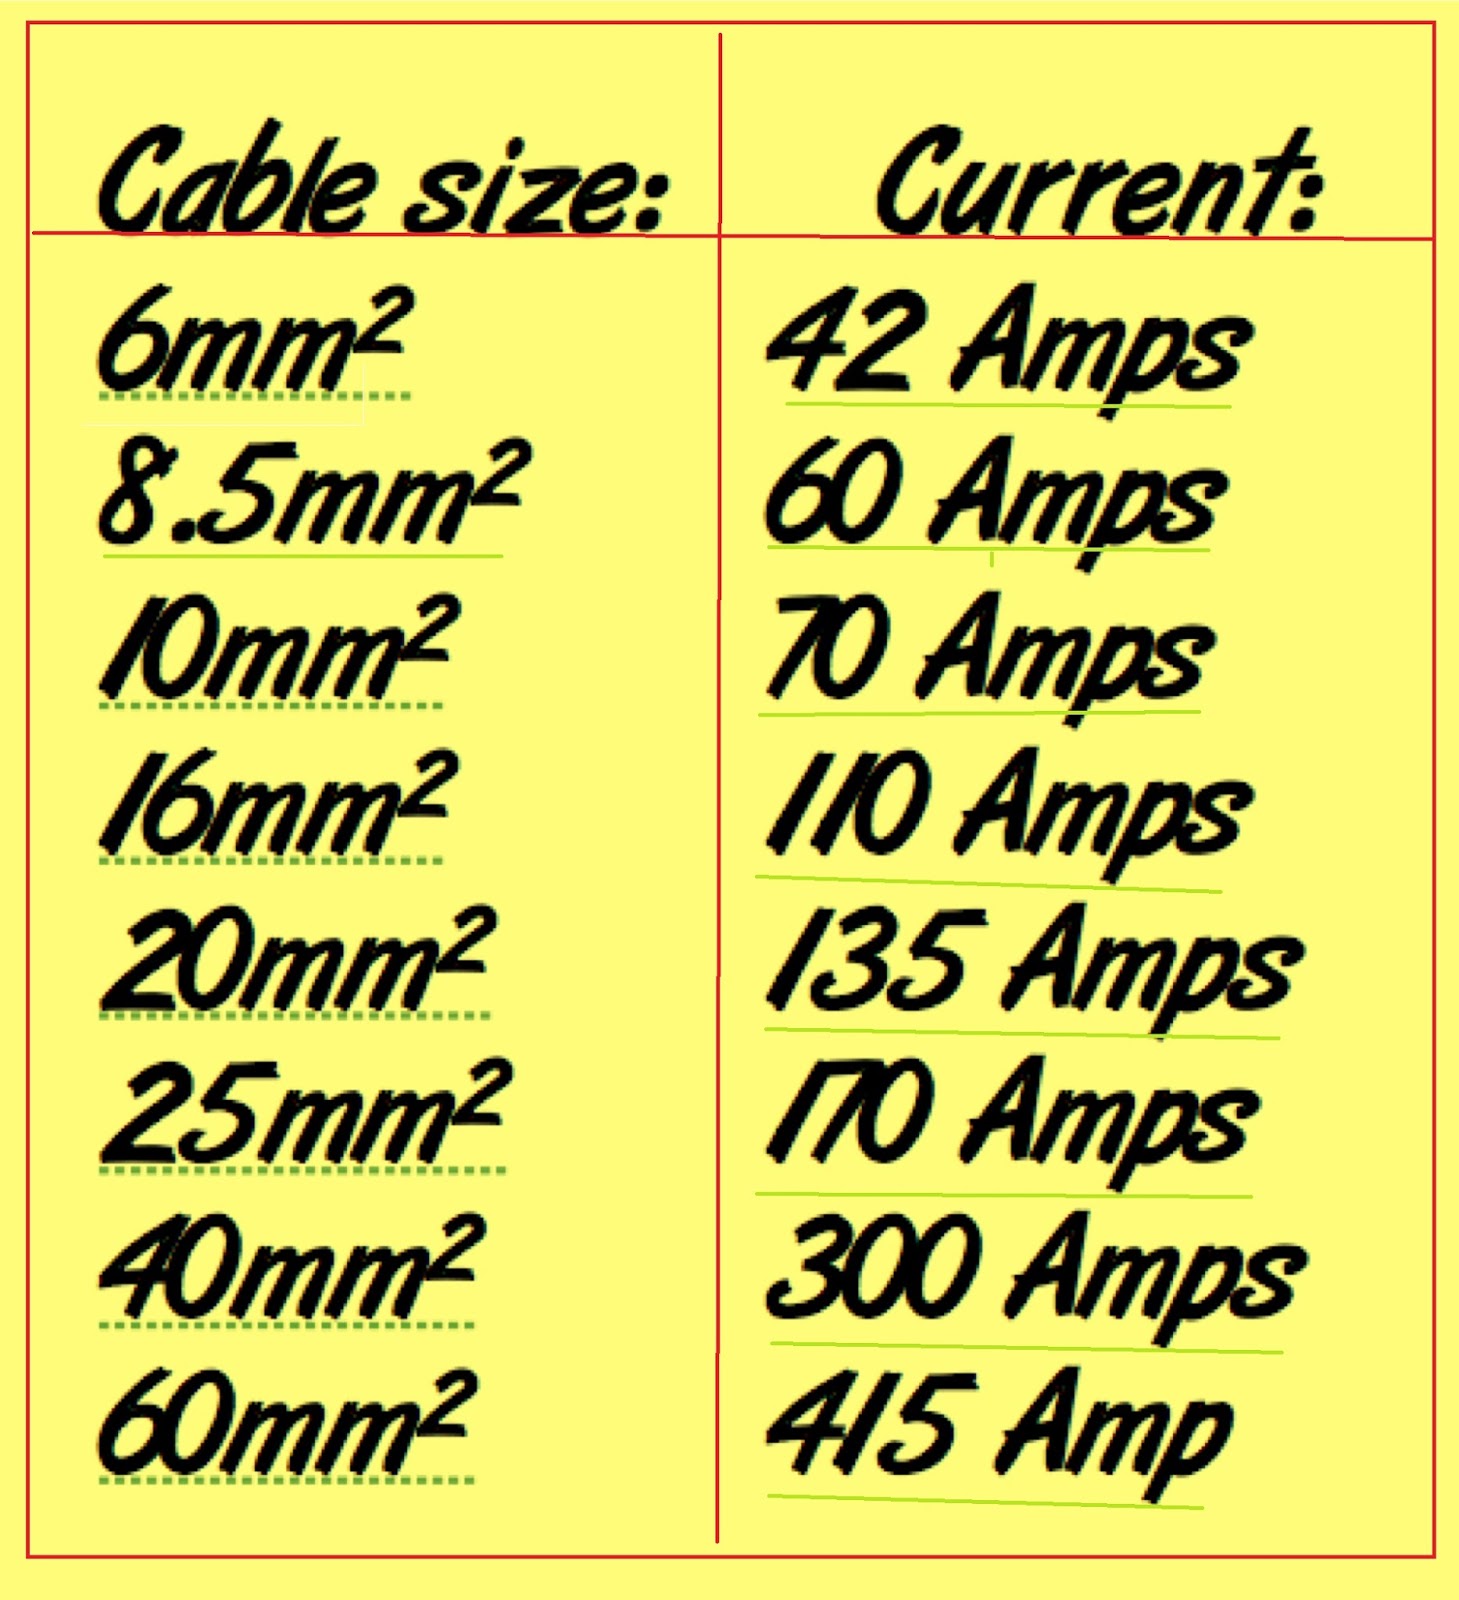 Cables Sizes and Current Capacity - EEE COMMUNITY home wiring wire welder 